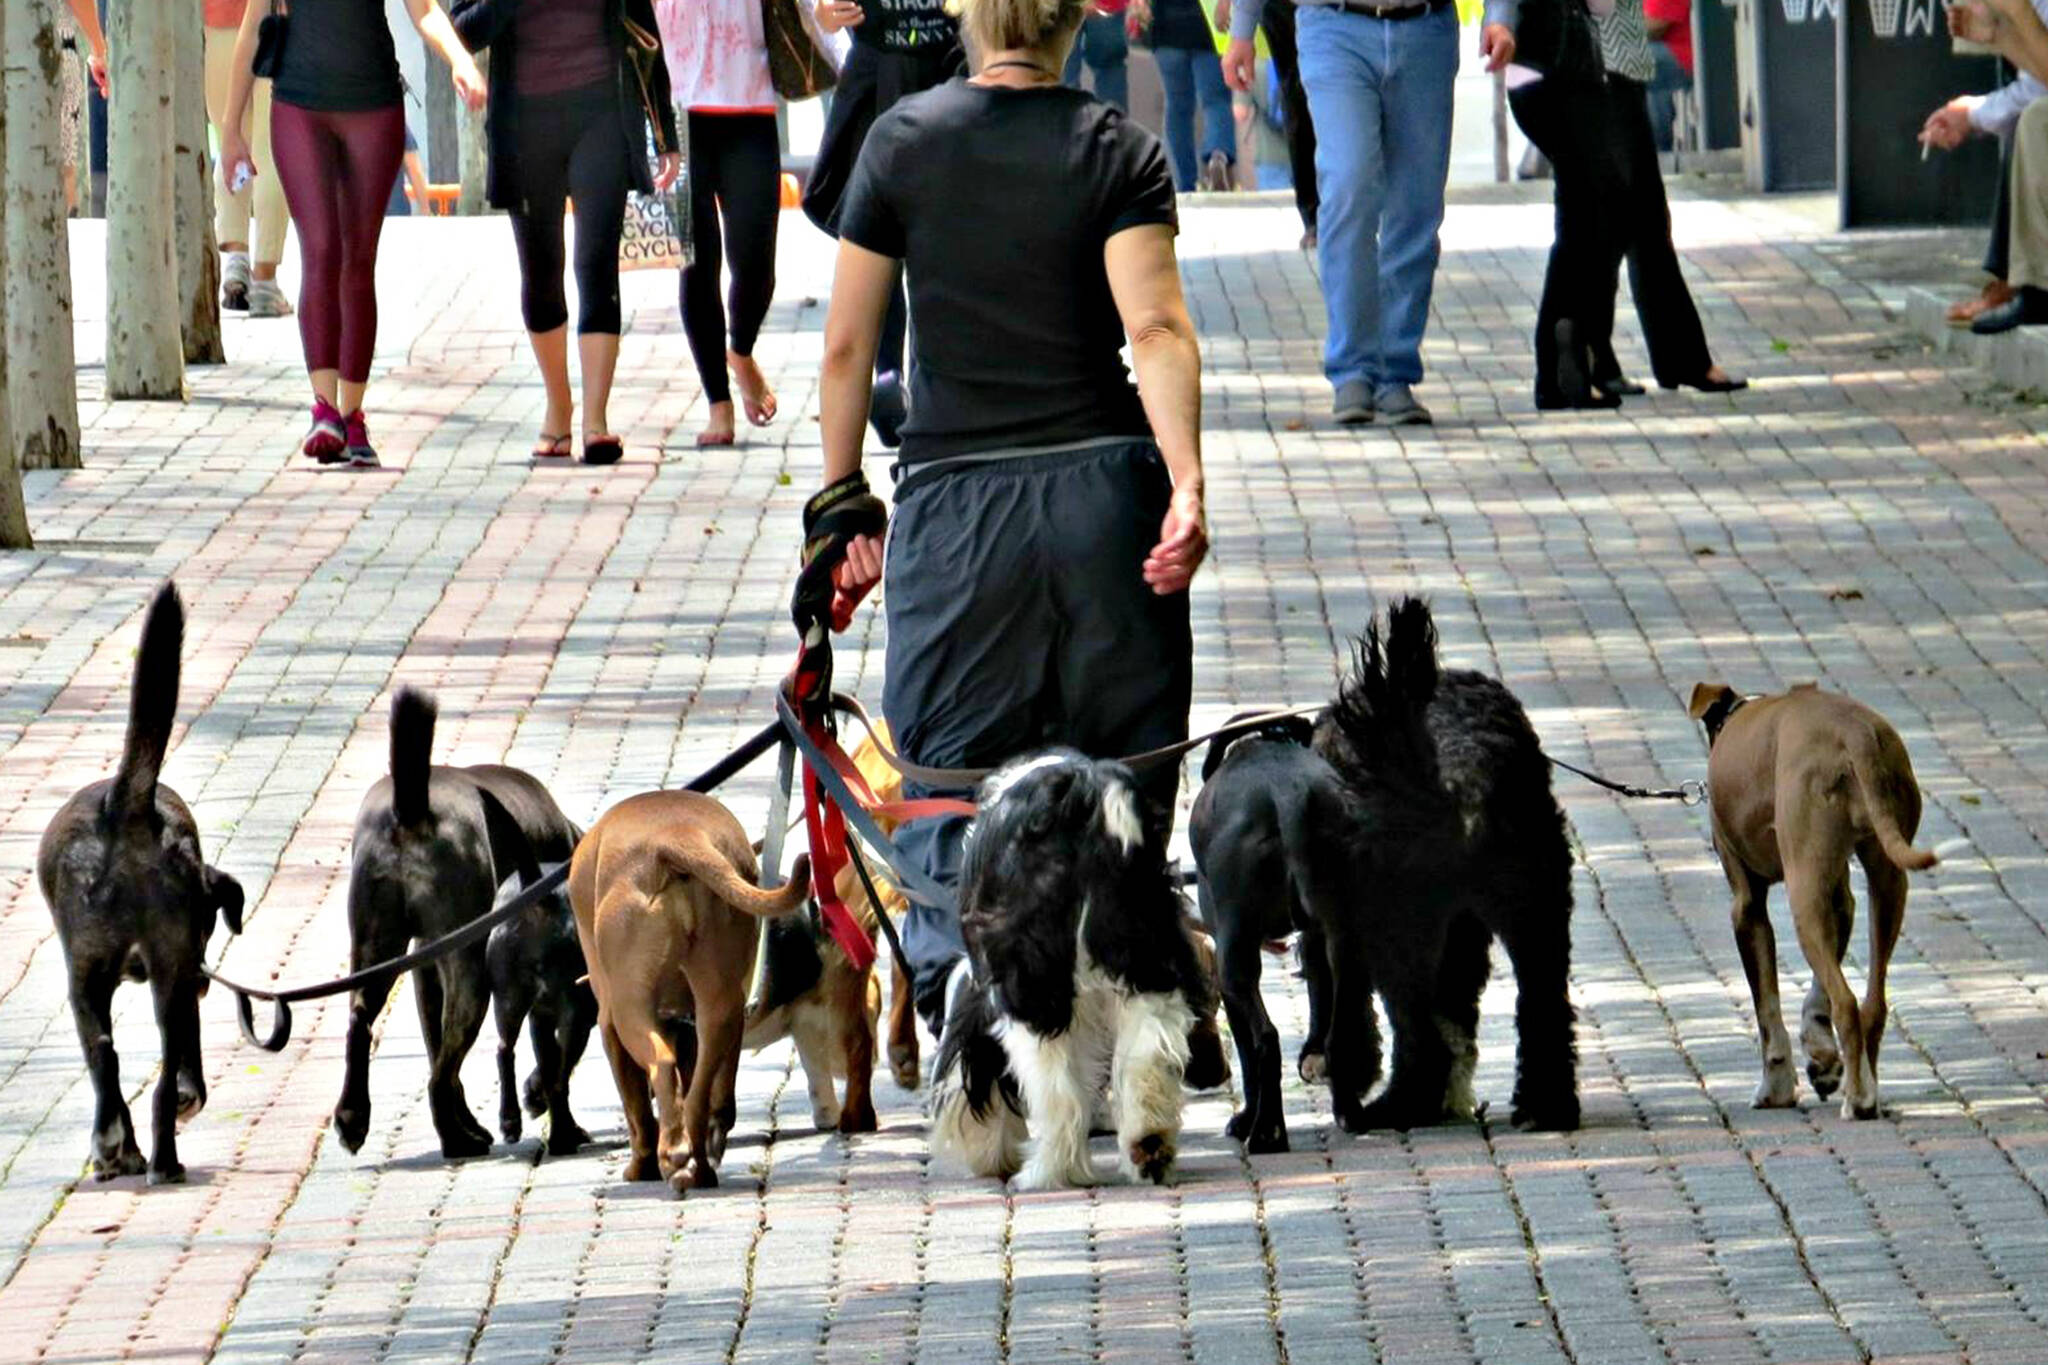 Ontario government now allowing dog walkers during lockdown after